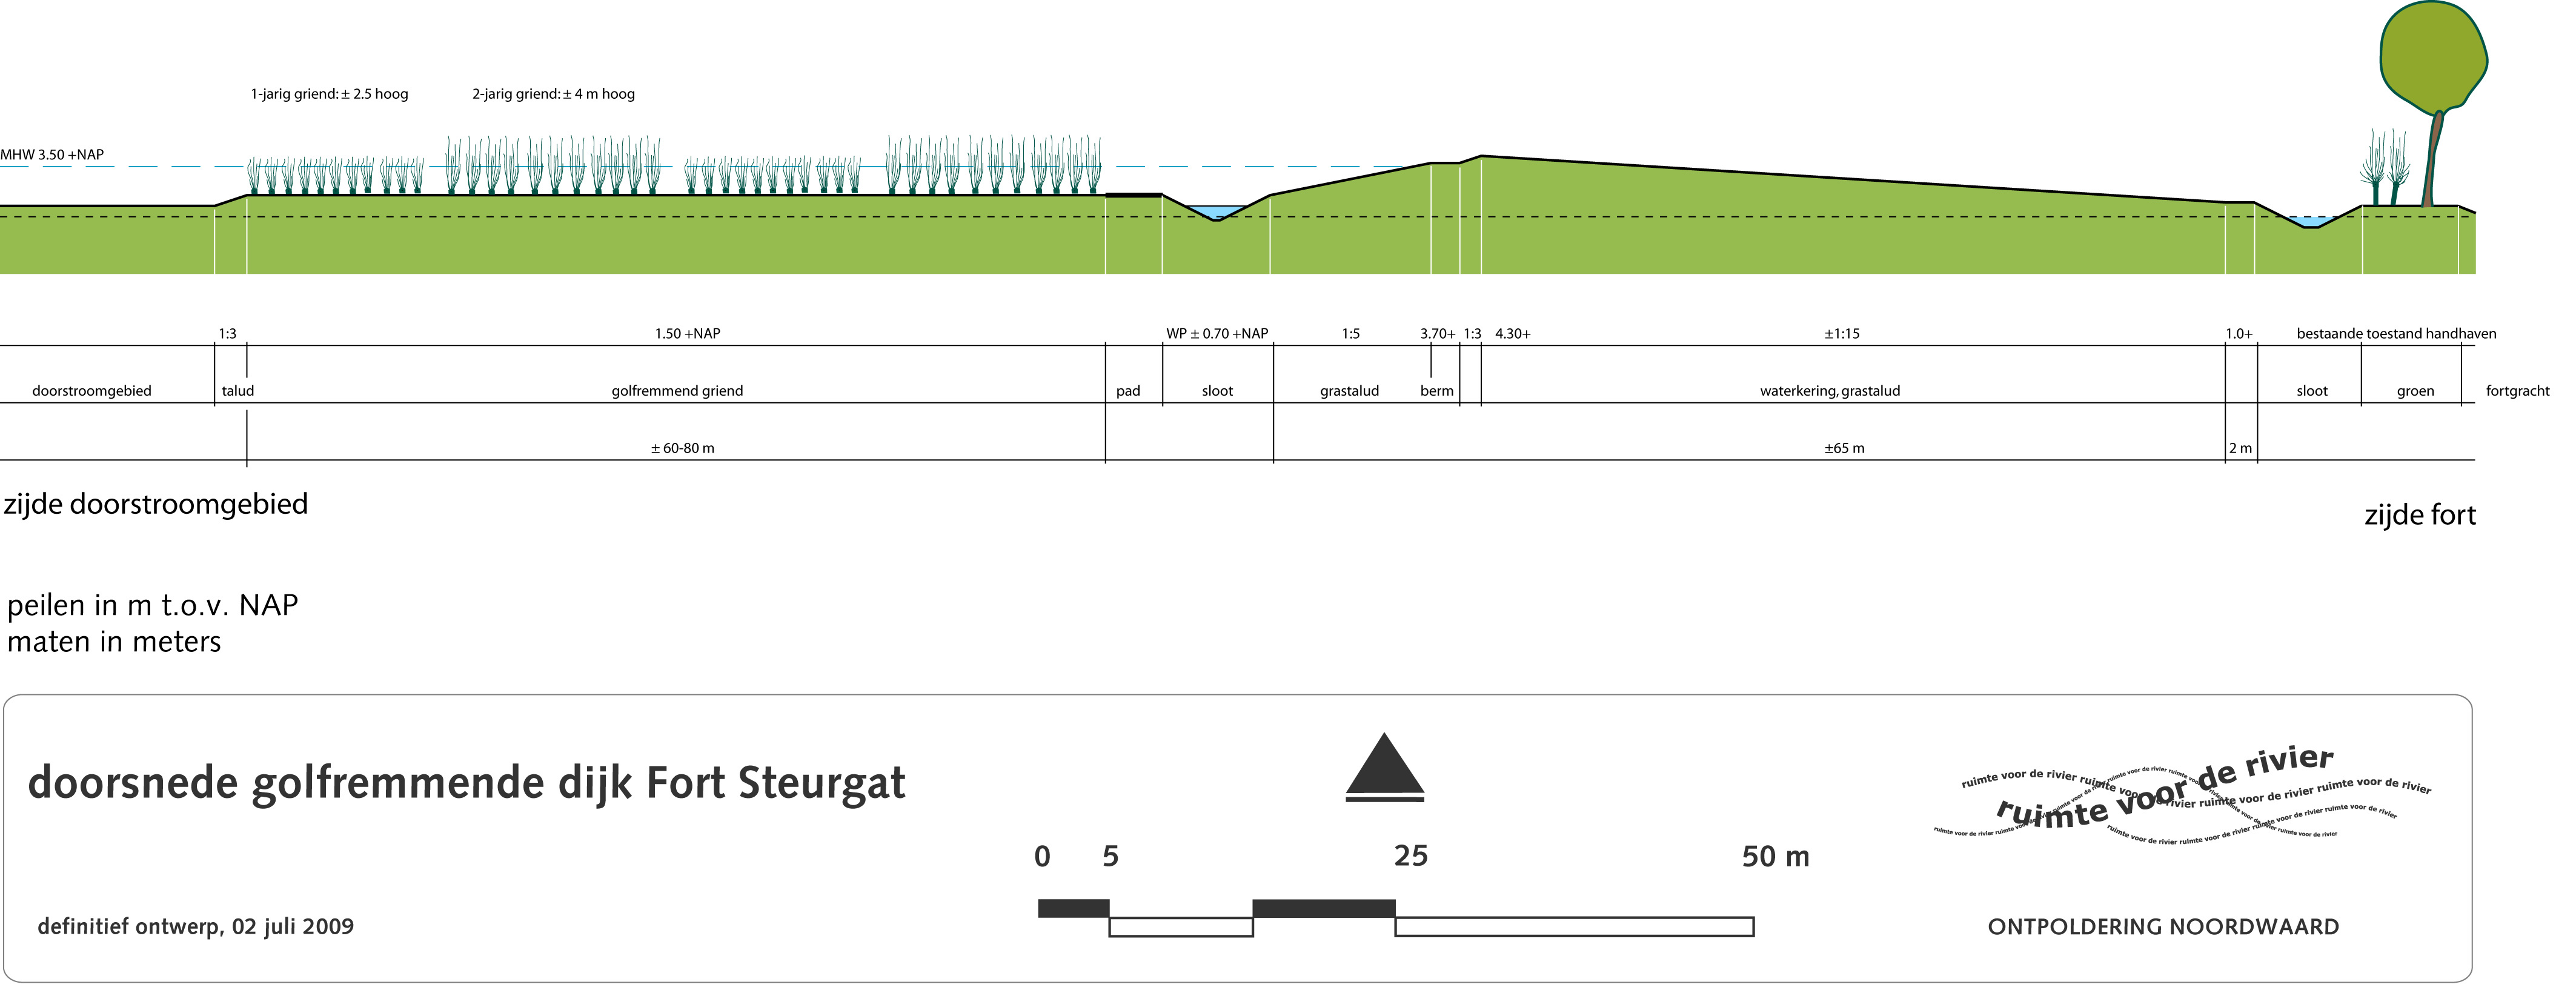 Cross profile of design for willow plantation and dike at Fort Steurgat